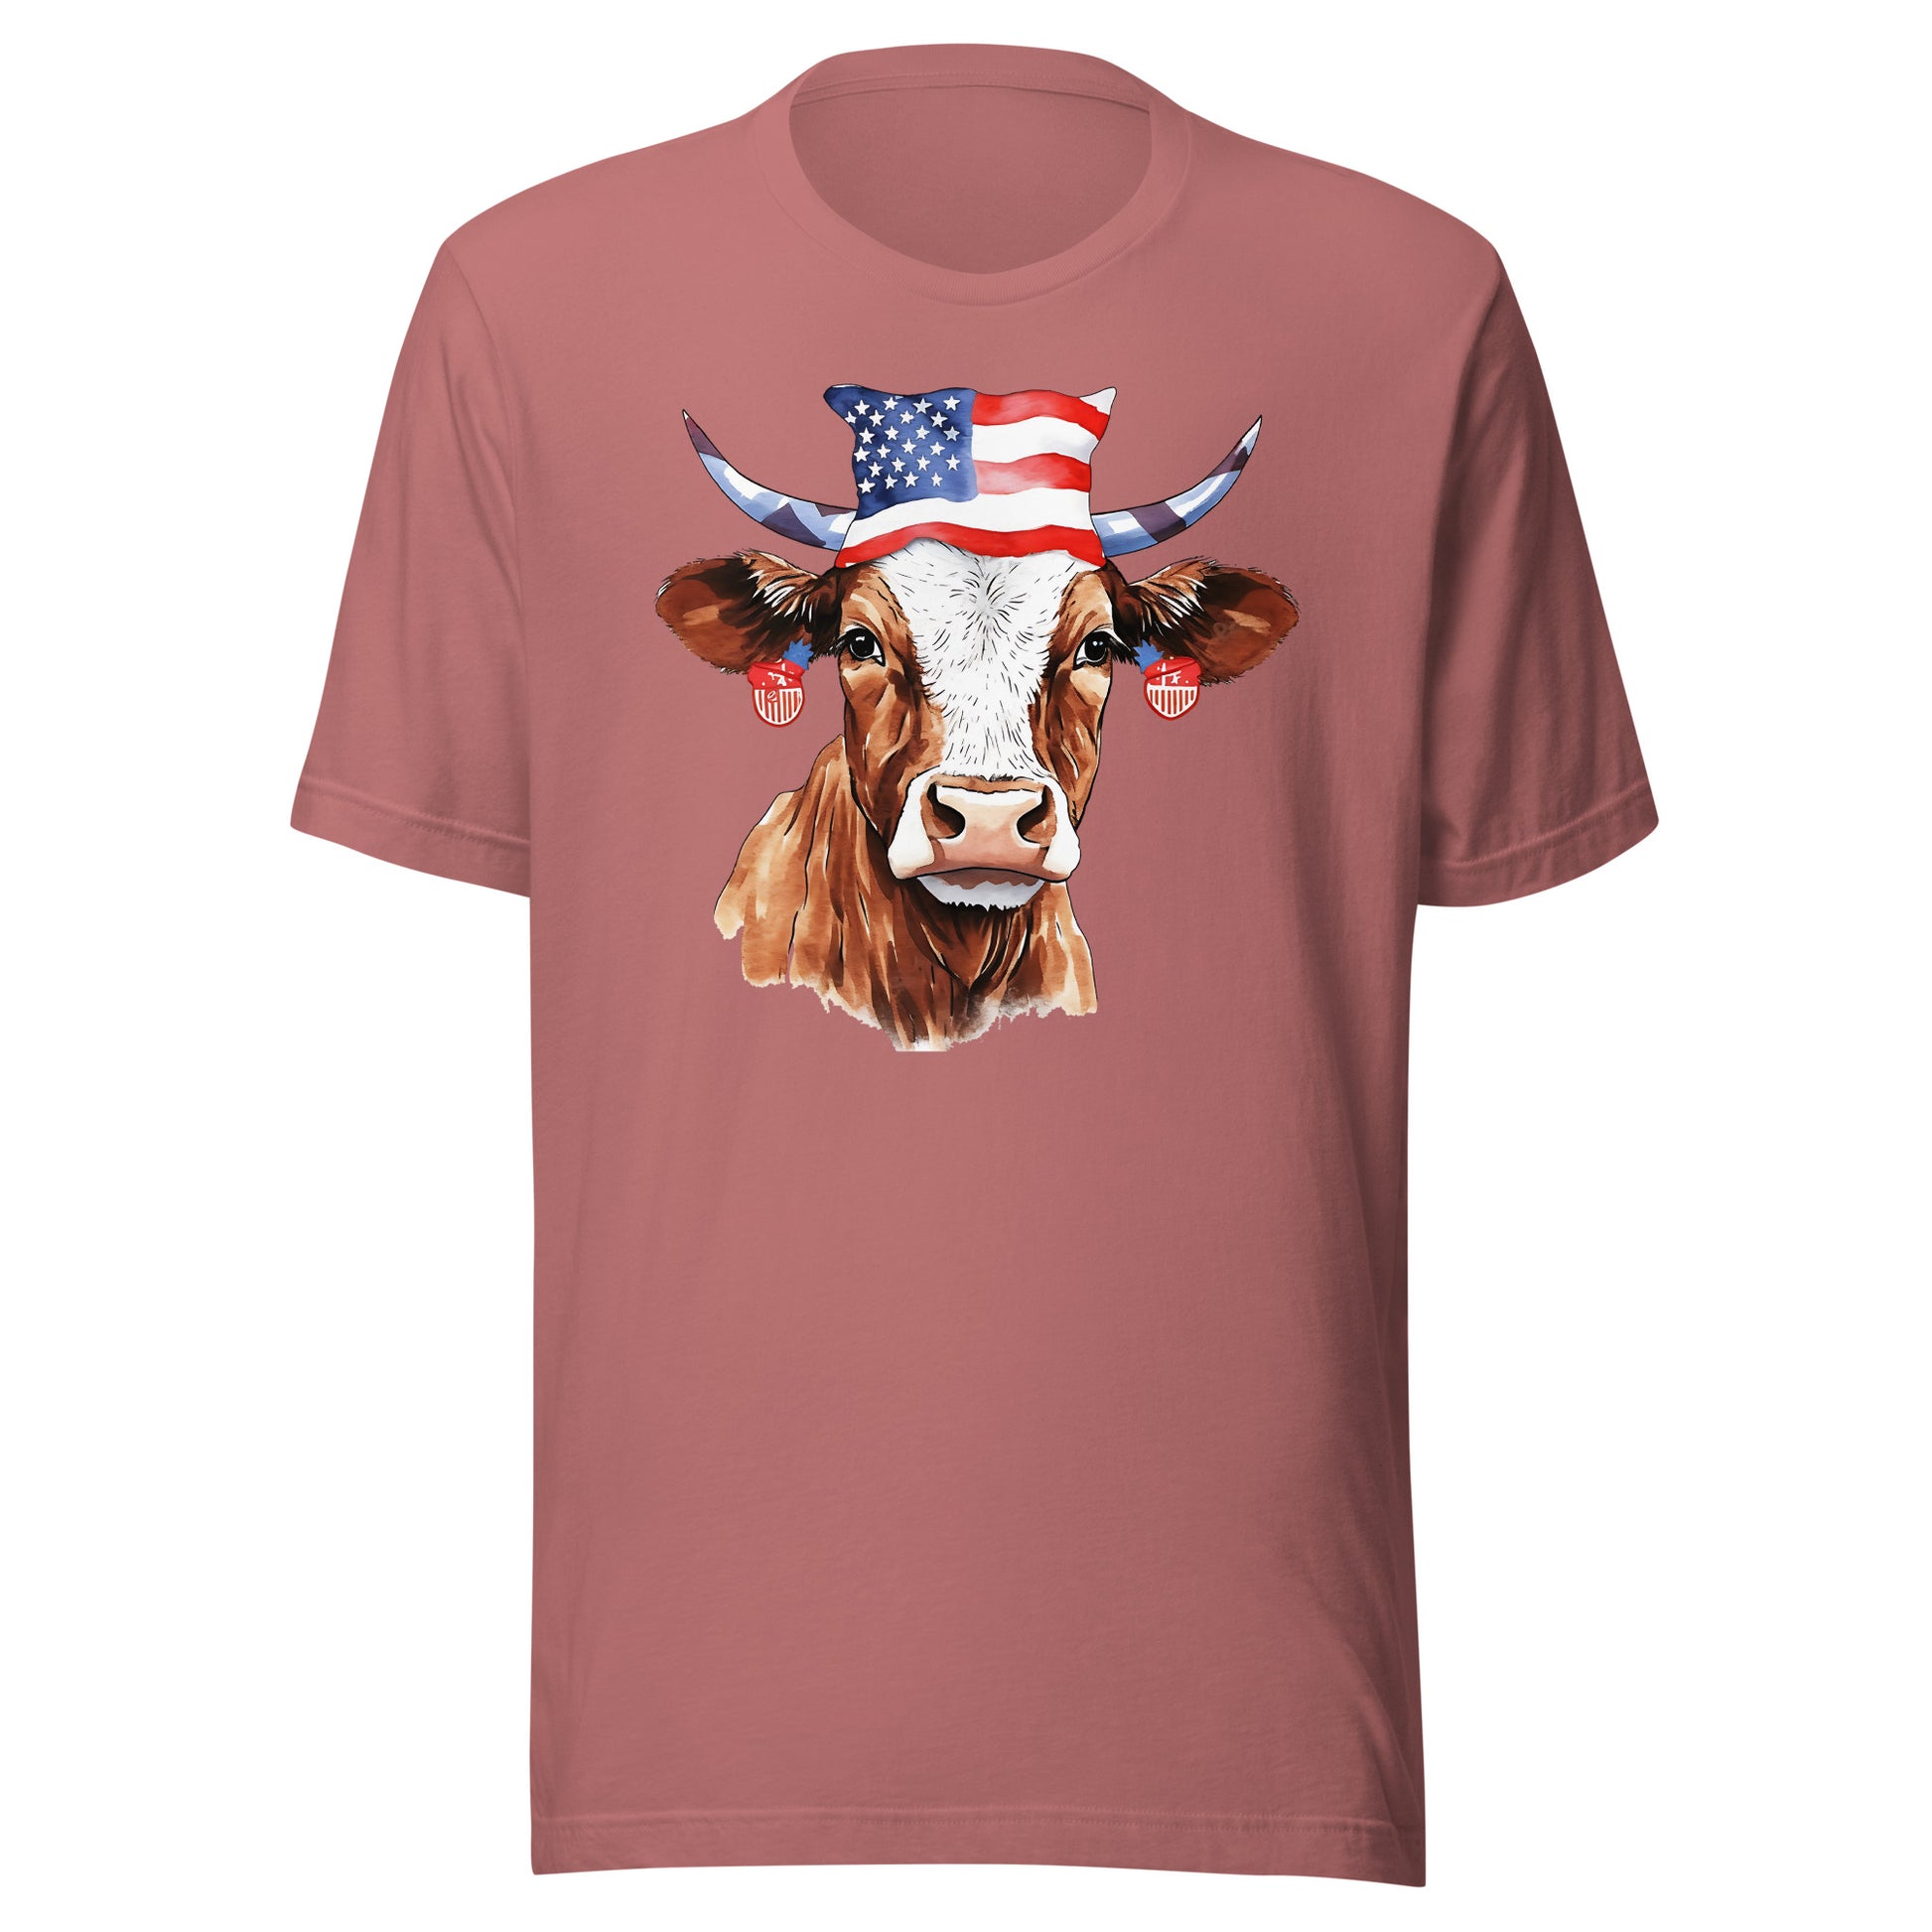 Patriotic Cow Tshirt For Cow Lovers Gift